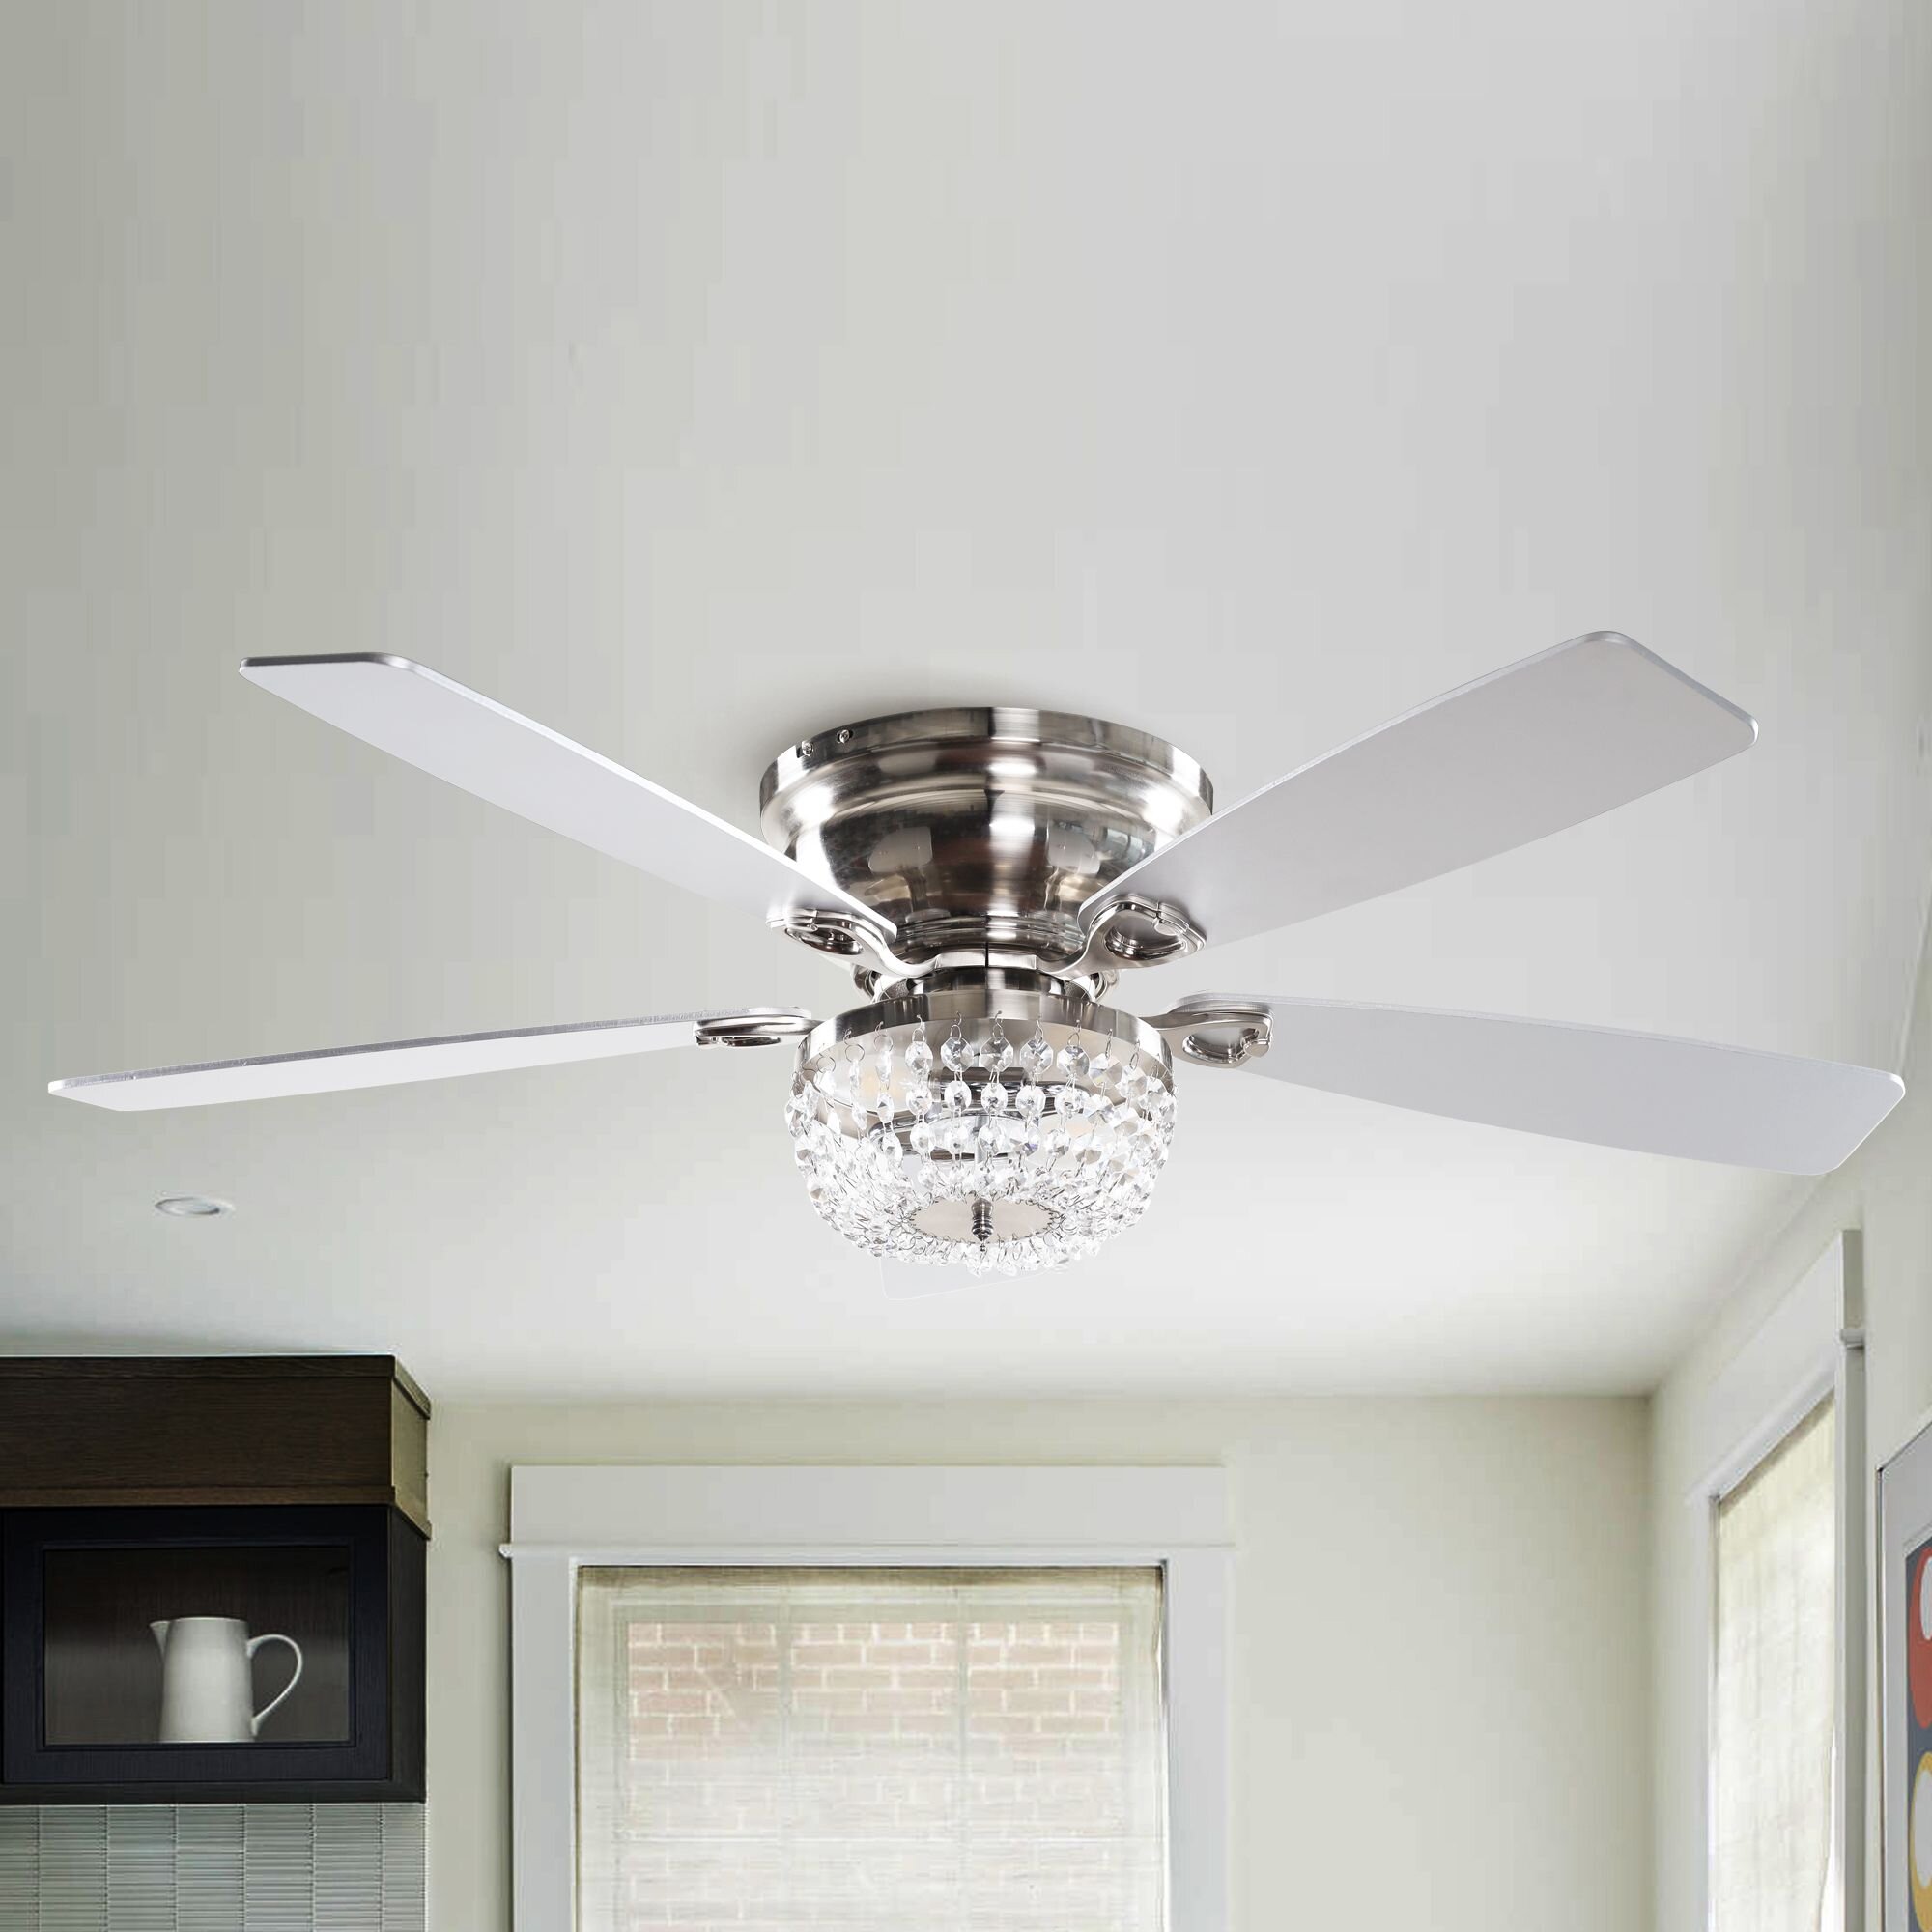 House Of Hampton 48 Shellie 5 Blade Crystal Ceiling Fan With Remote Control And Light Kit Included Reviews Wayfair